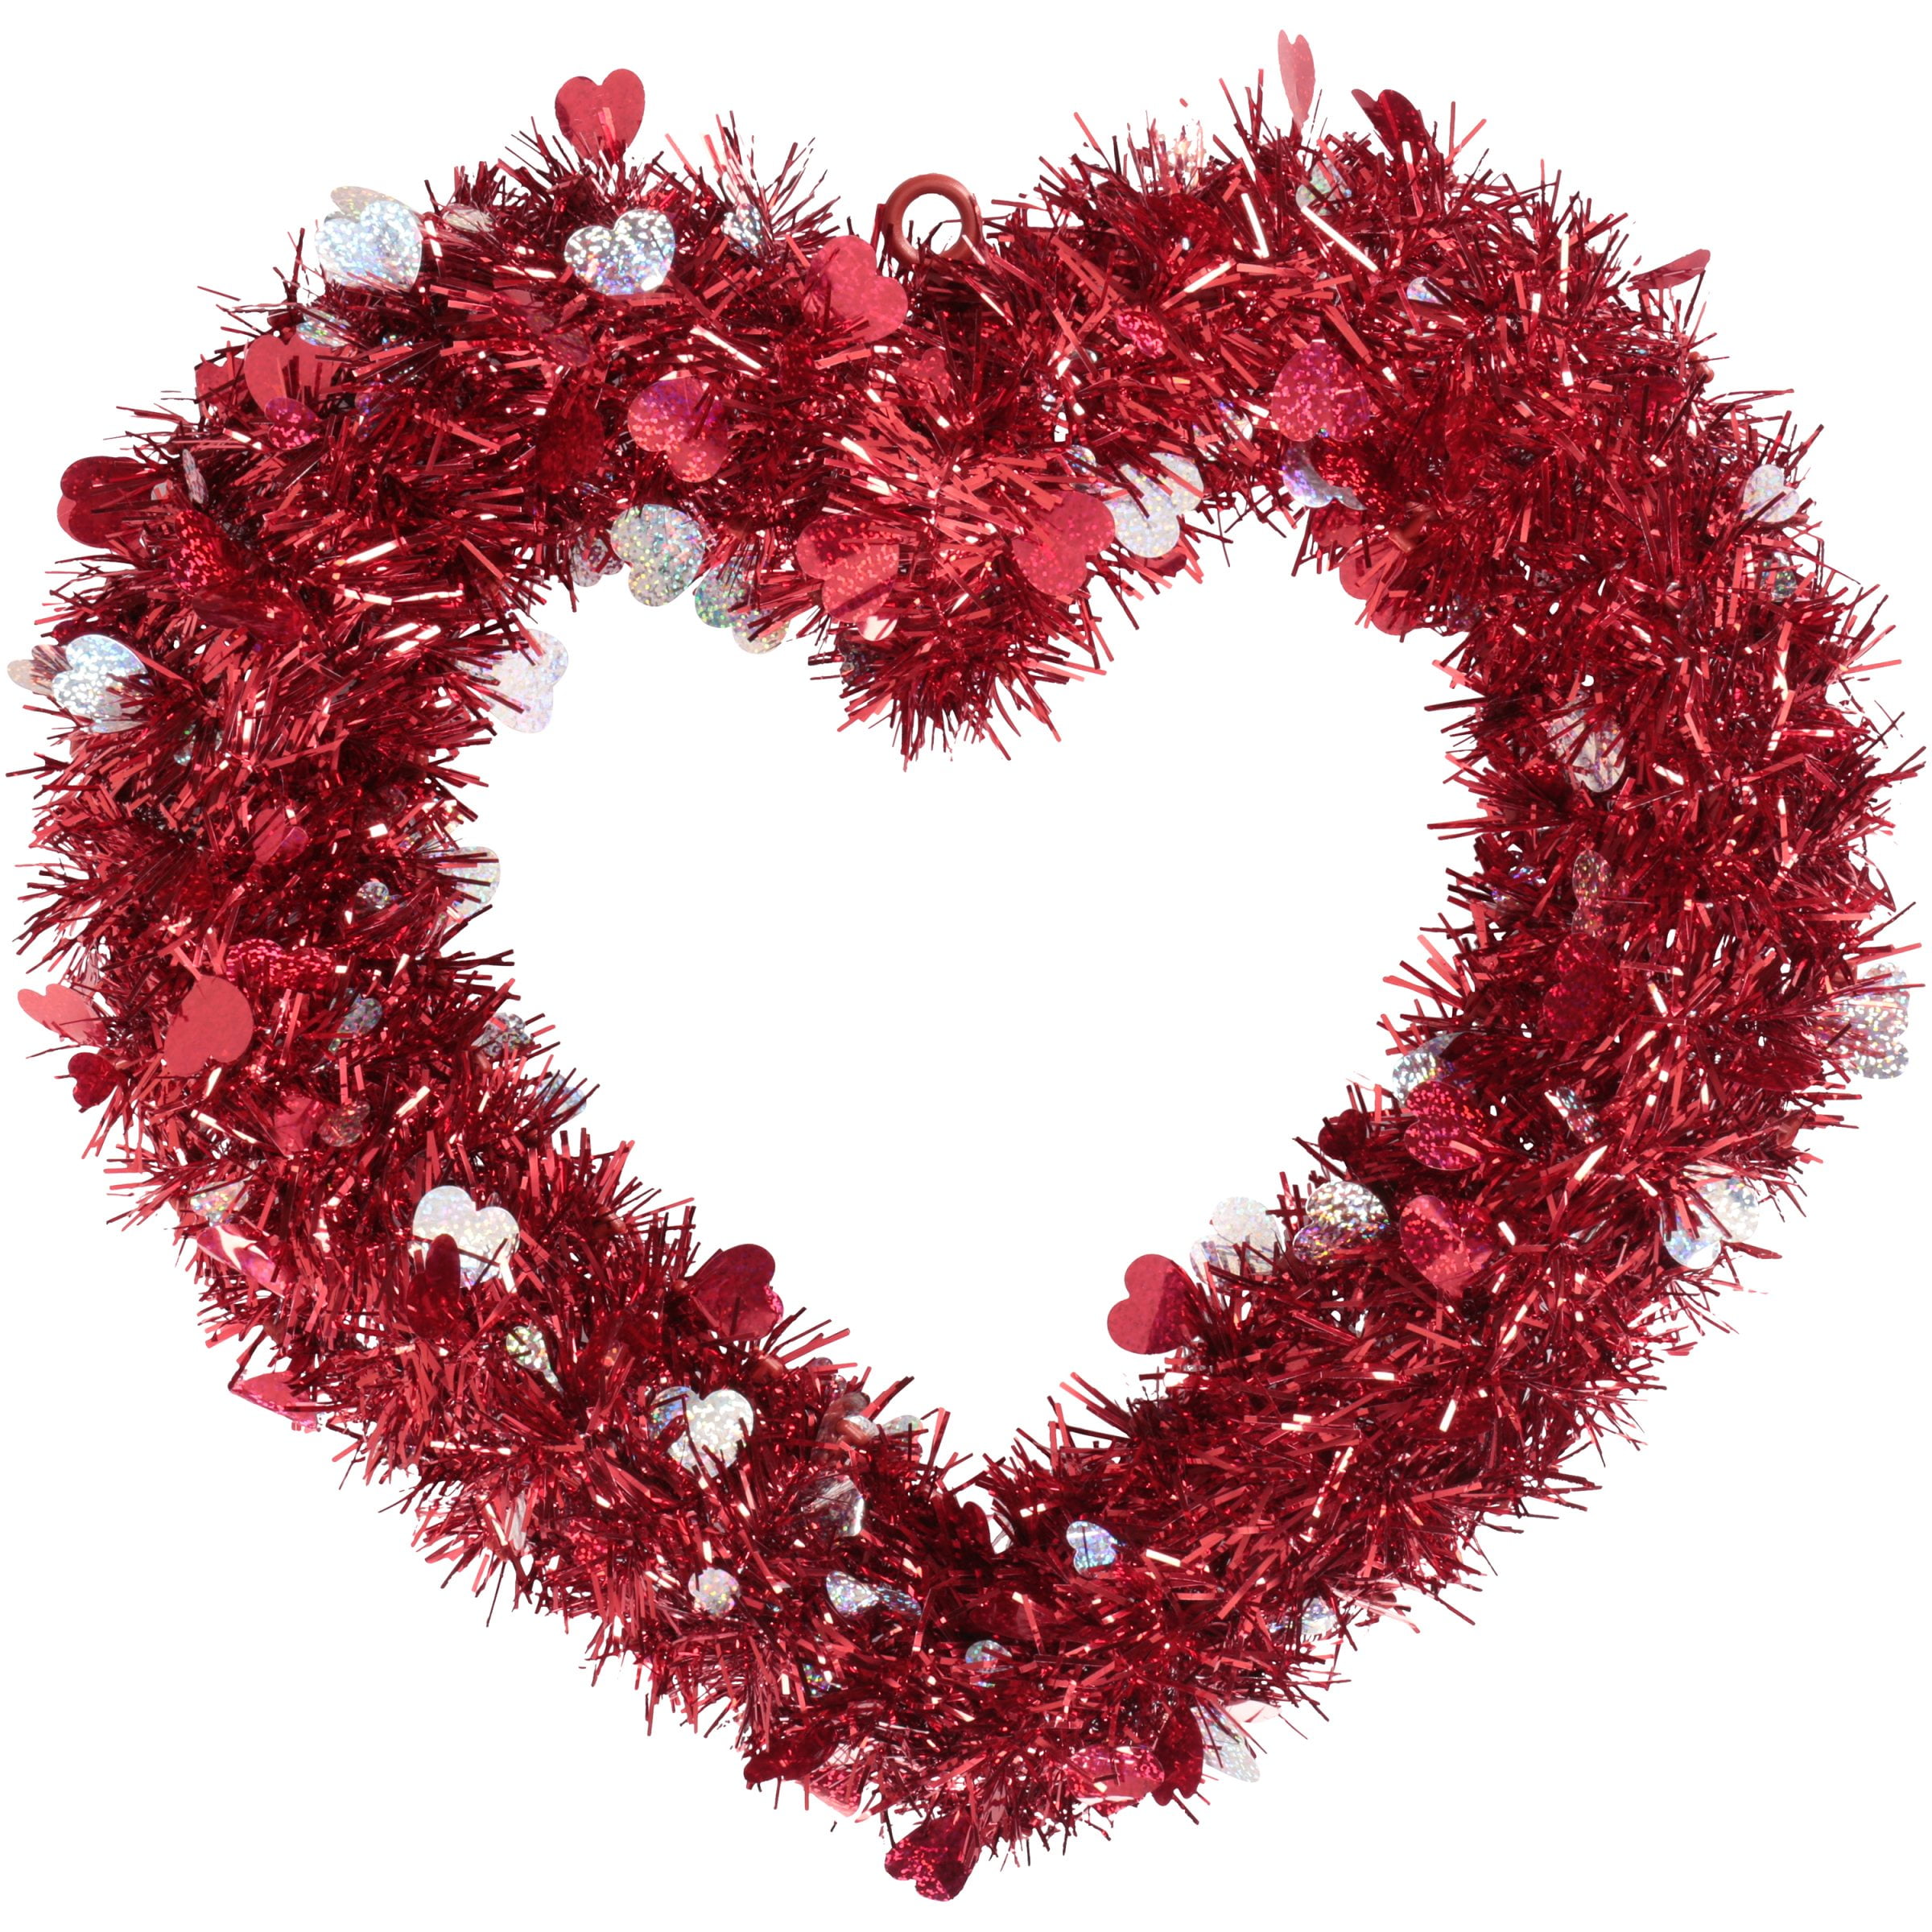 Valentine's red & silver heart shaped wreath decoration.